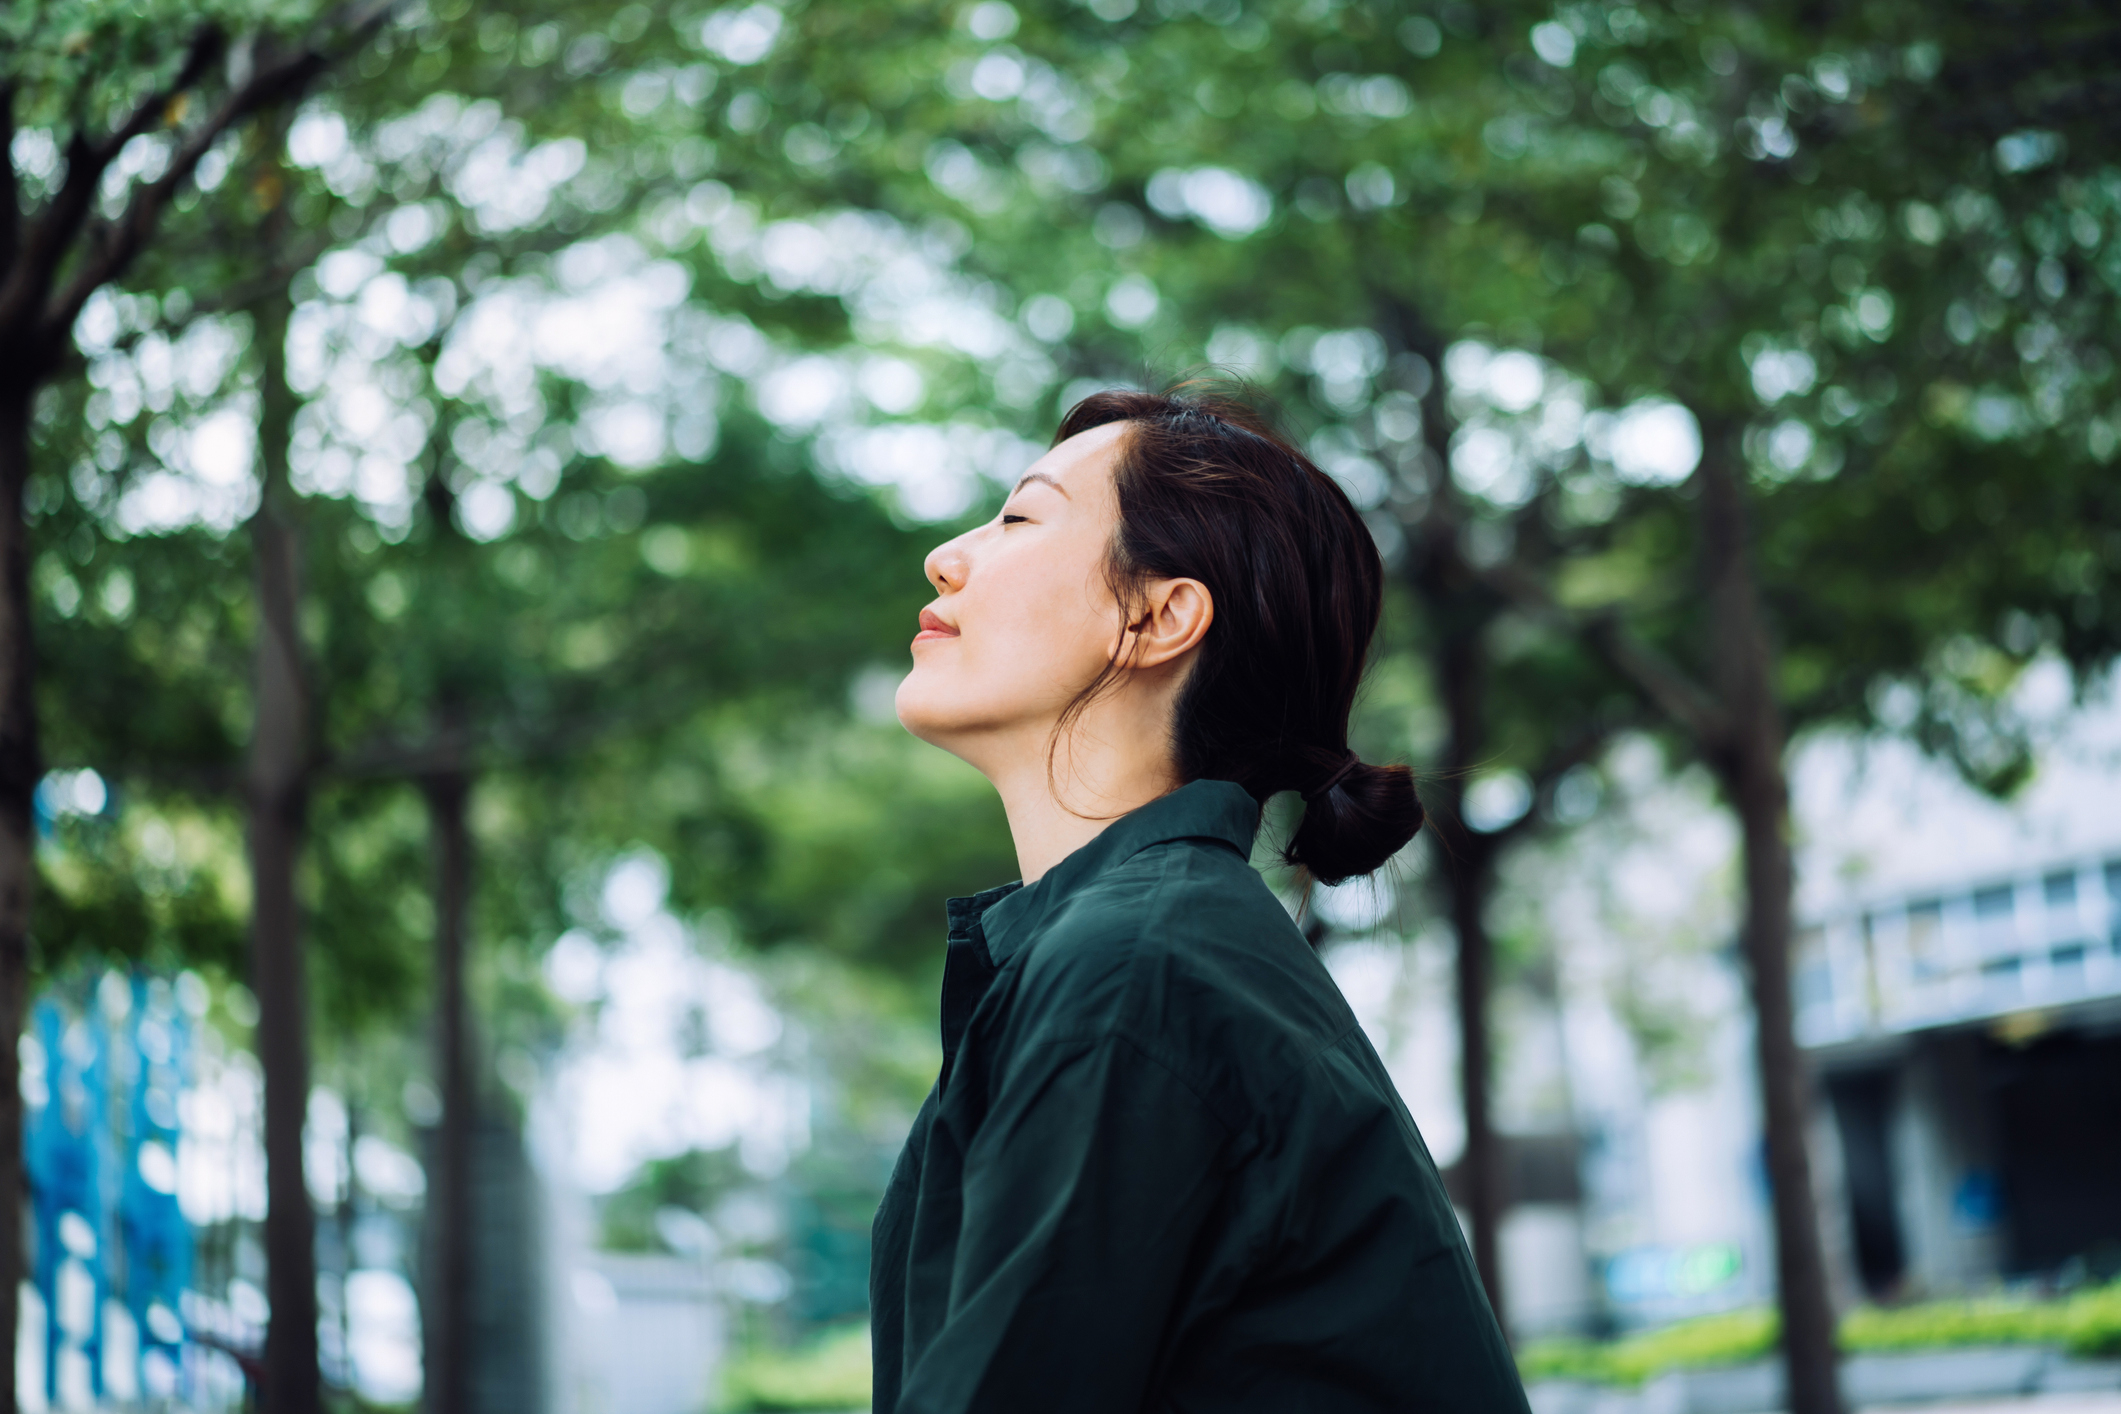 Woman in casual wear with eyes closed and head raised, enjoying fresh air among trees in an urban setting